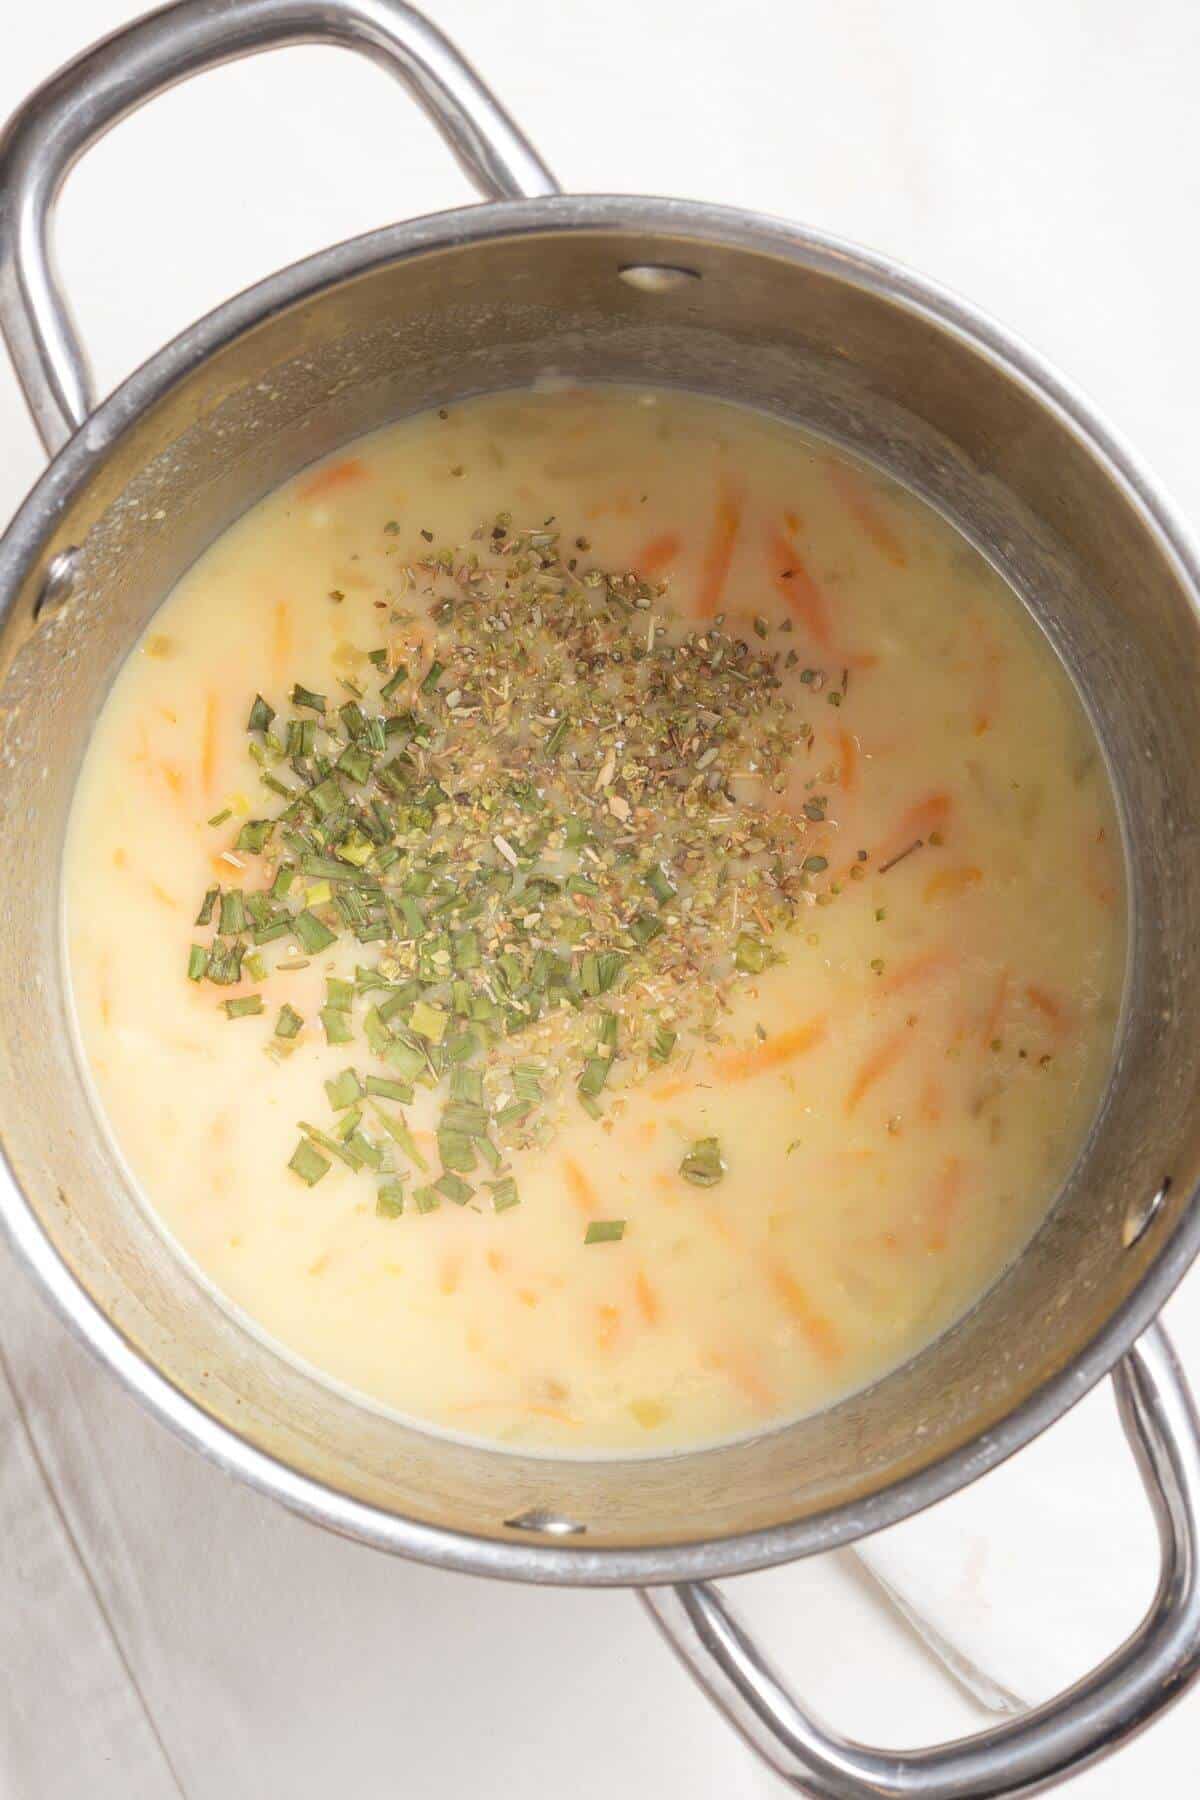 Milk and spices added to soup in pot.